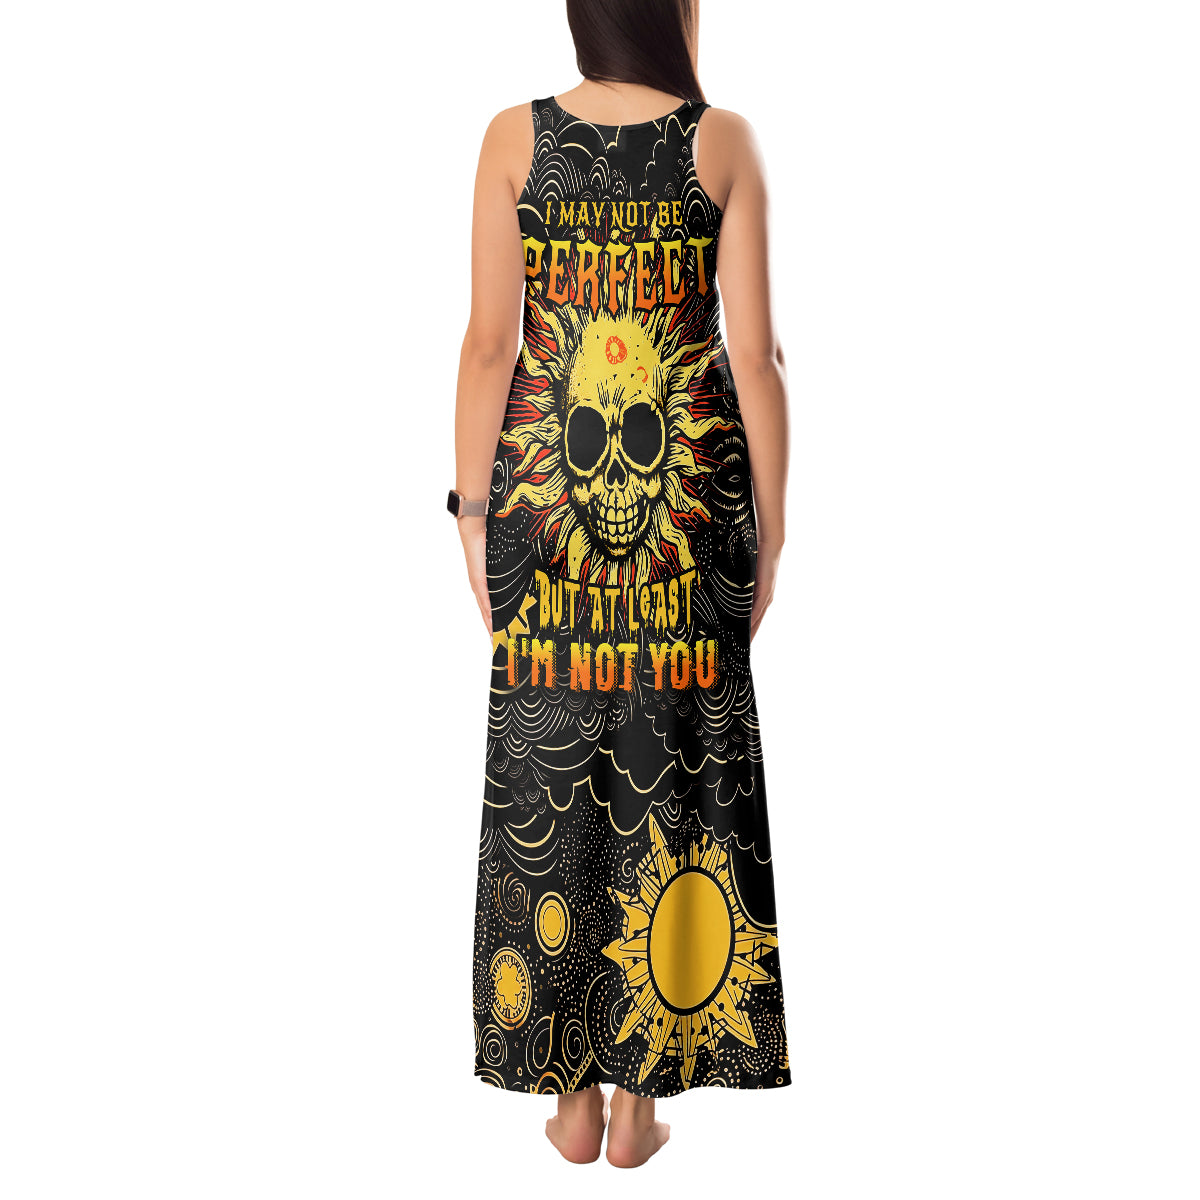 sun-skull-tank-maxi-dress-i-may-not-be-perfect-but-at-least-im-not-you